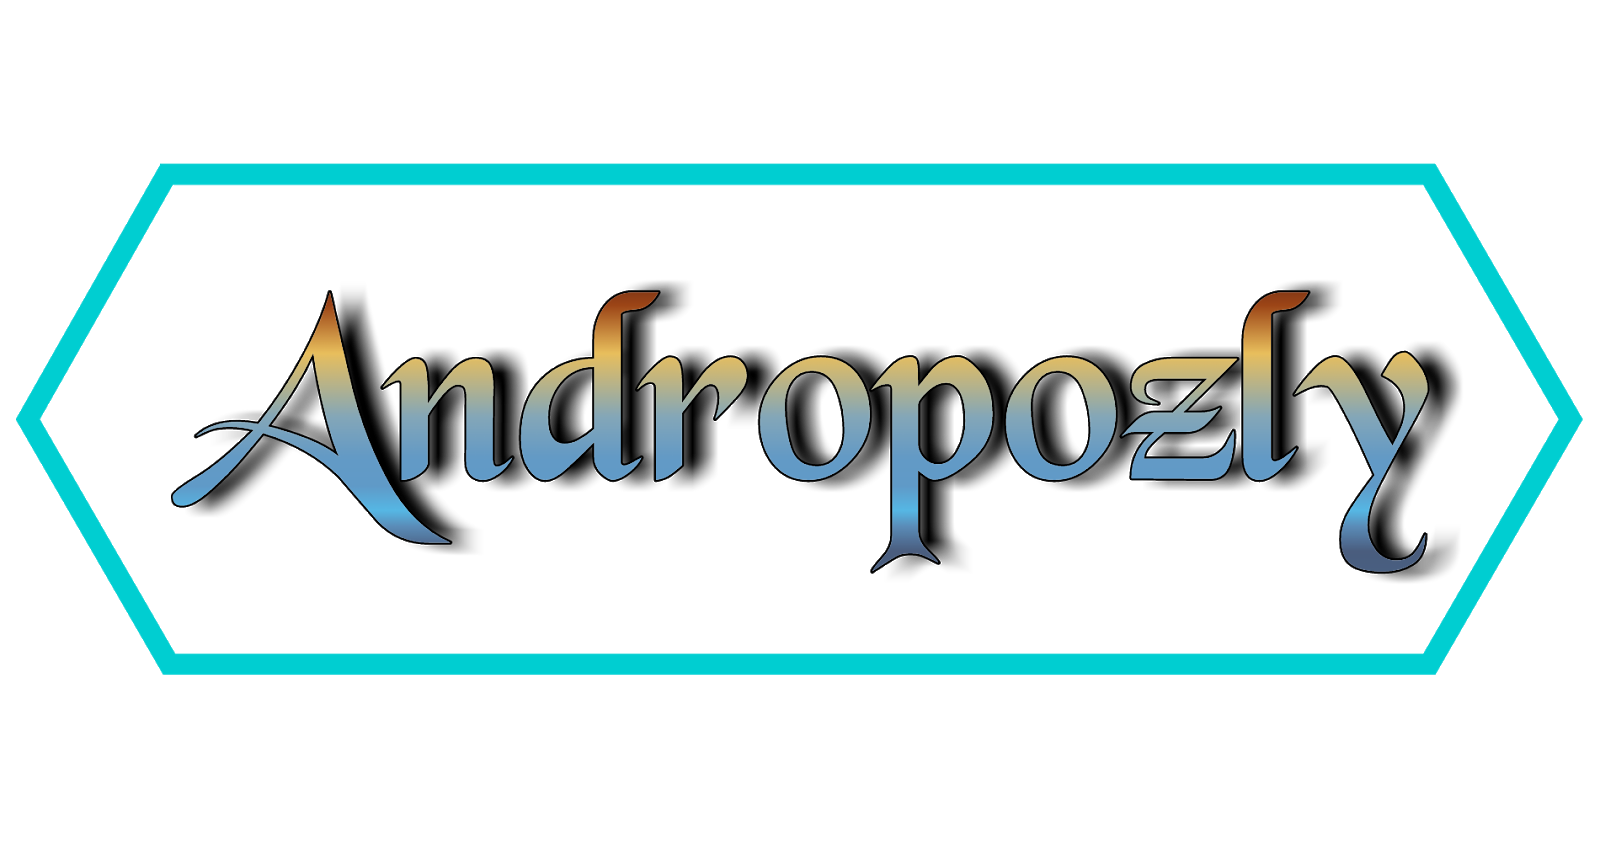 Andropozly